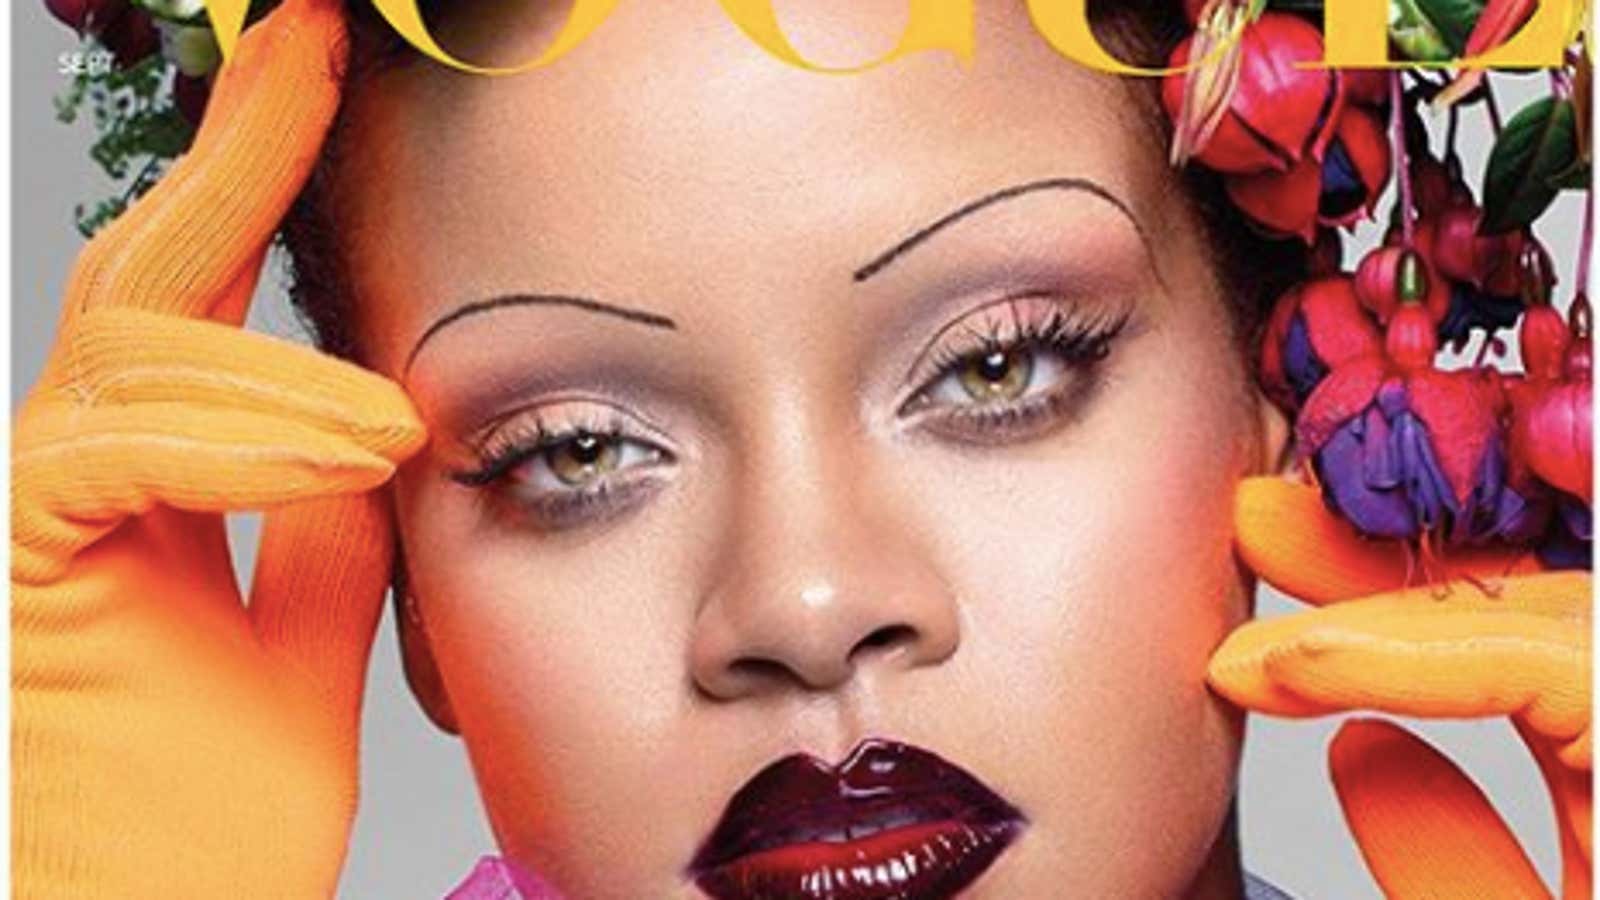 Rihanna’s Vogue cover recalls a long, miserable history of over-plucked brows